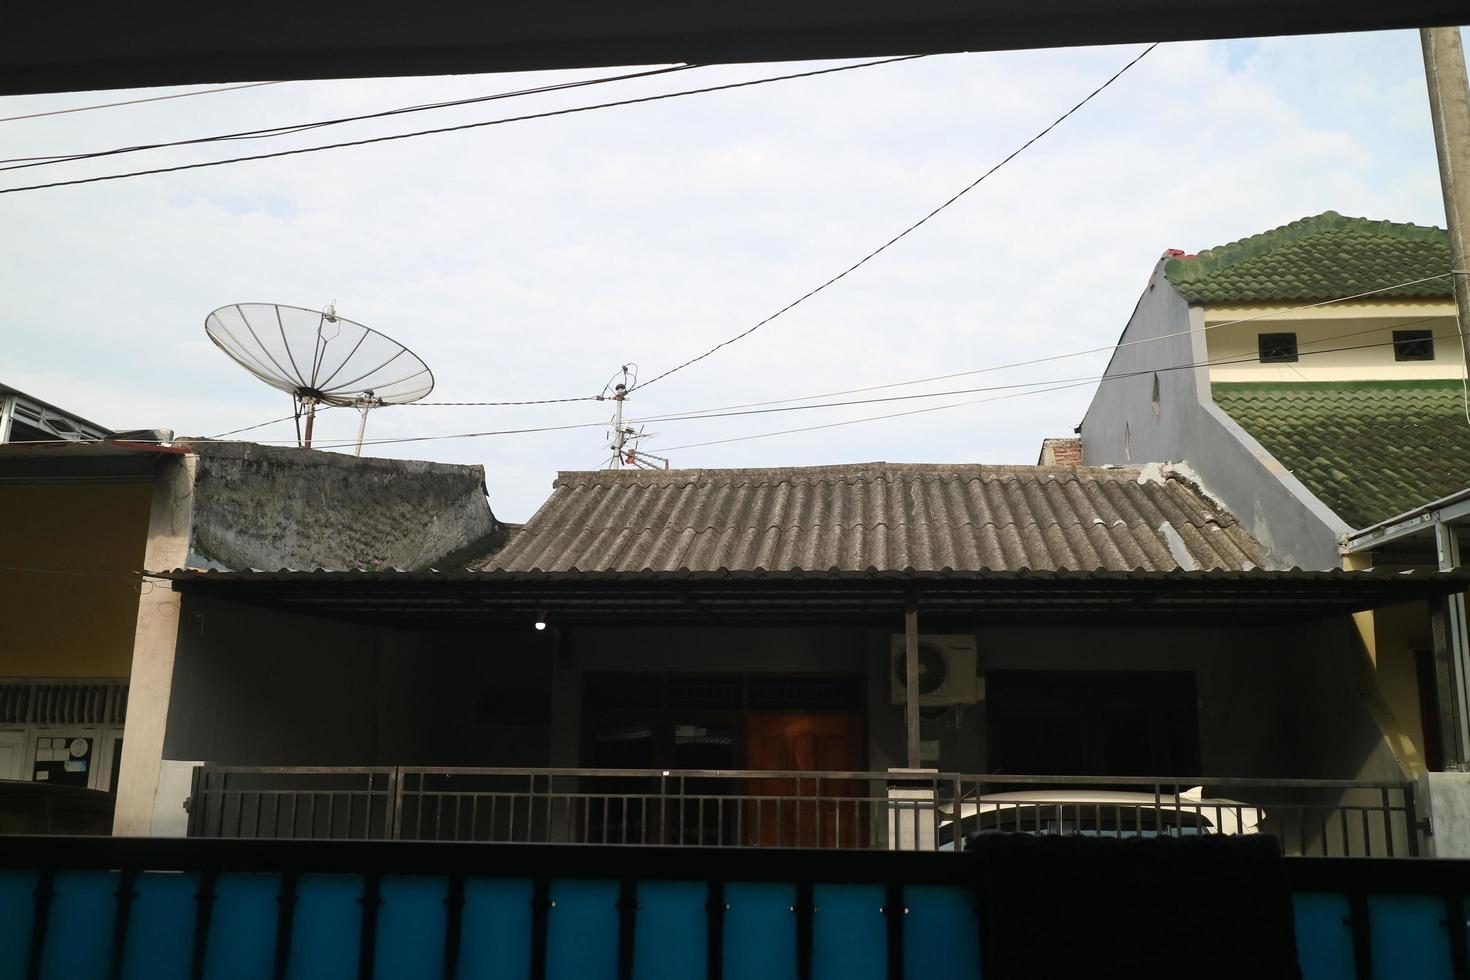 a photo of the house with a gray tile and a large satellite dish on it